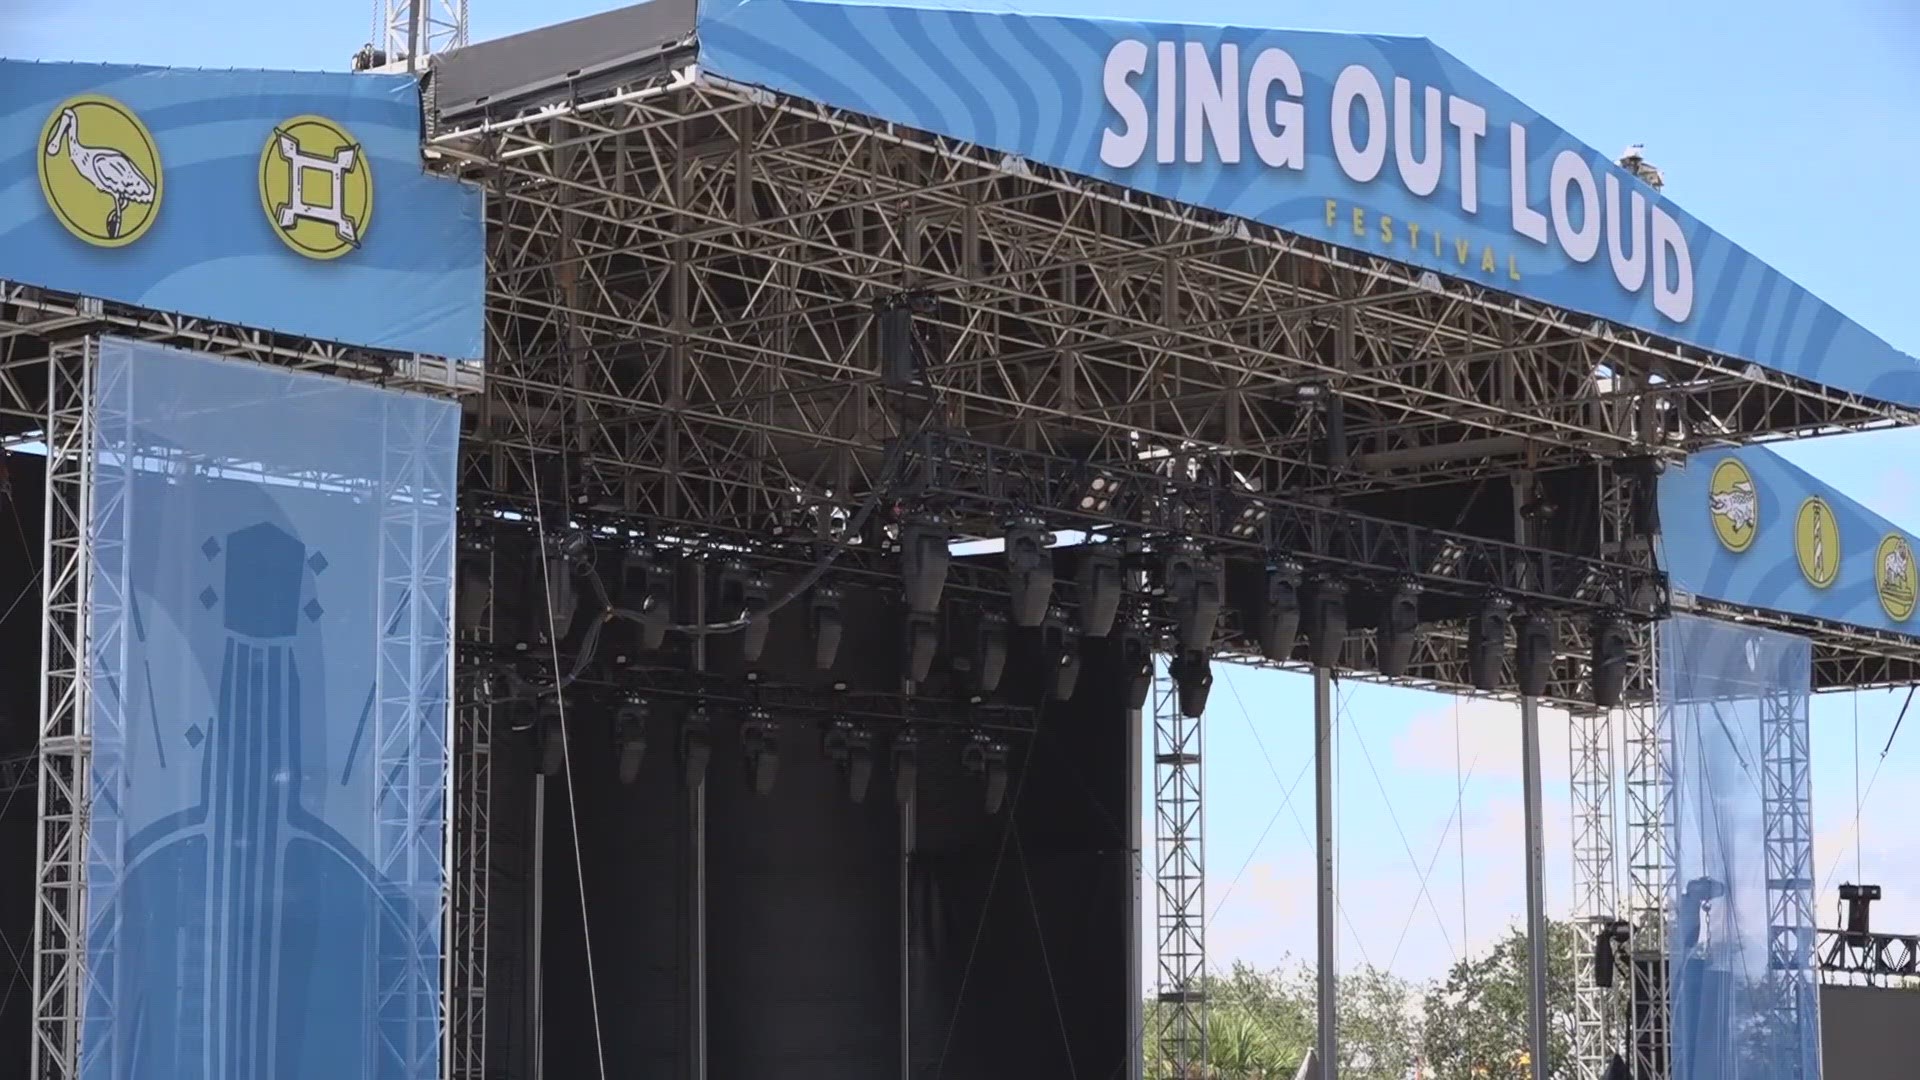 Event organizers prepare Francis Field for more than 27,000 people and a two-day line-up of concerts